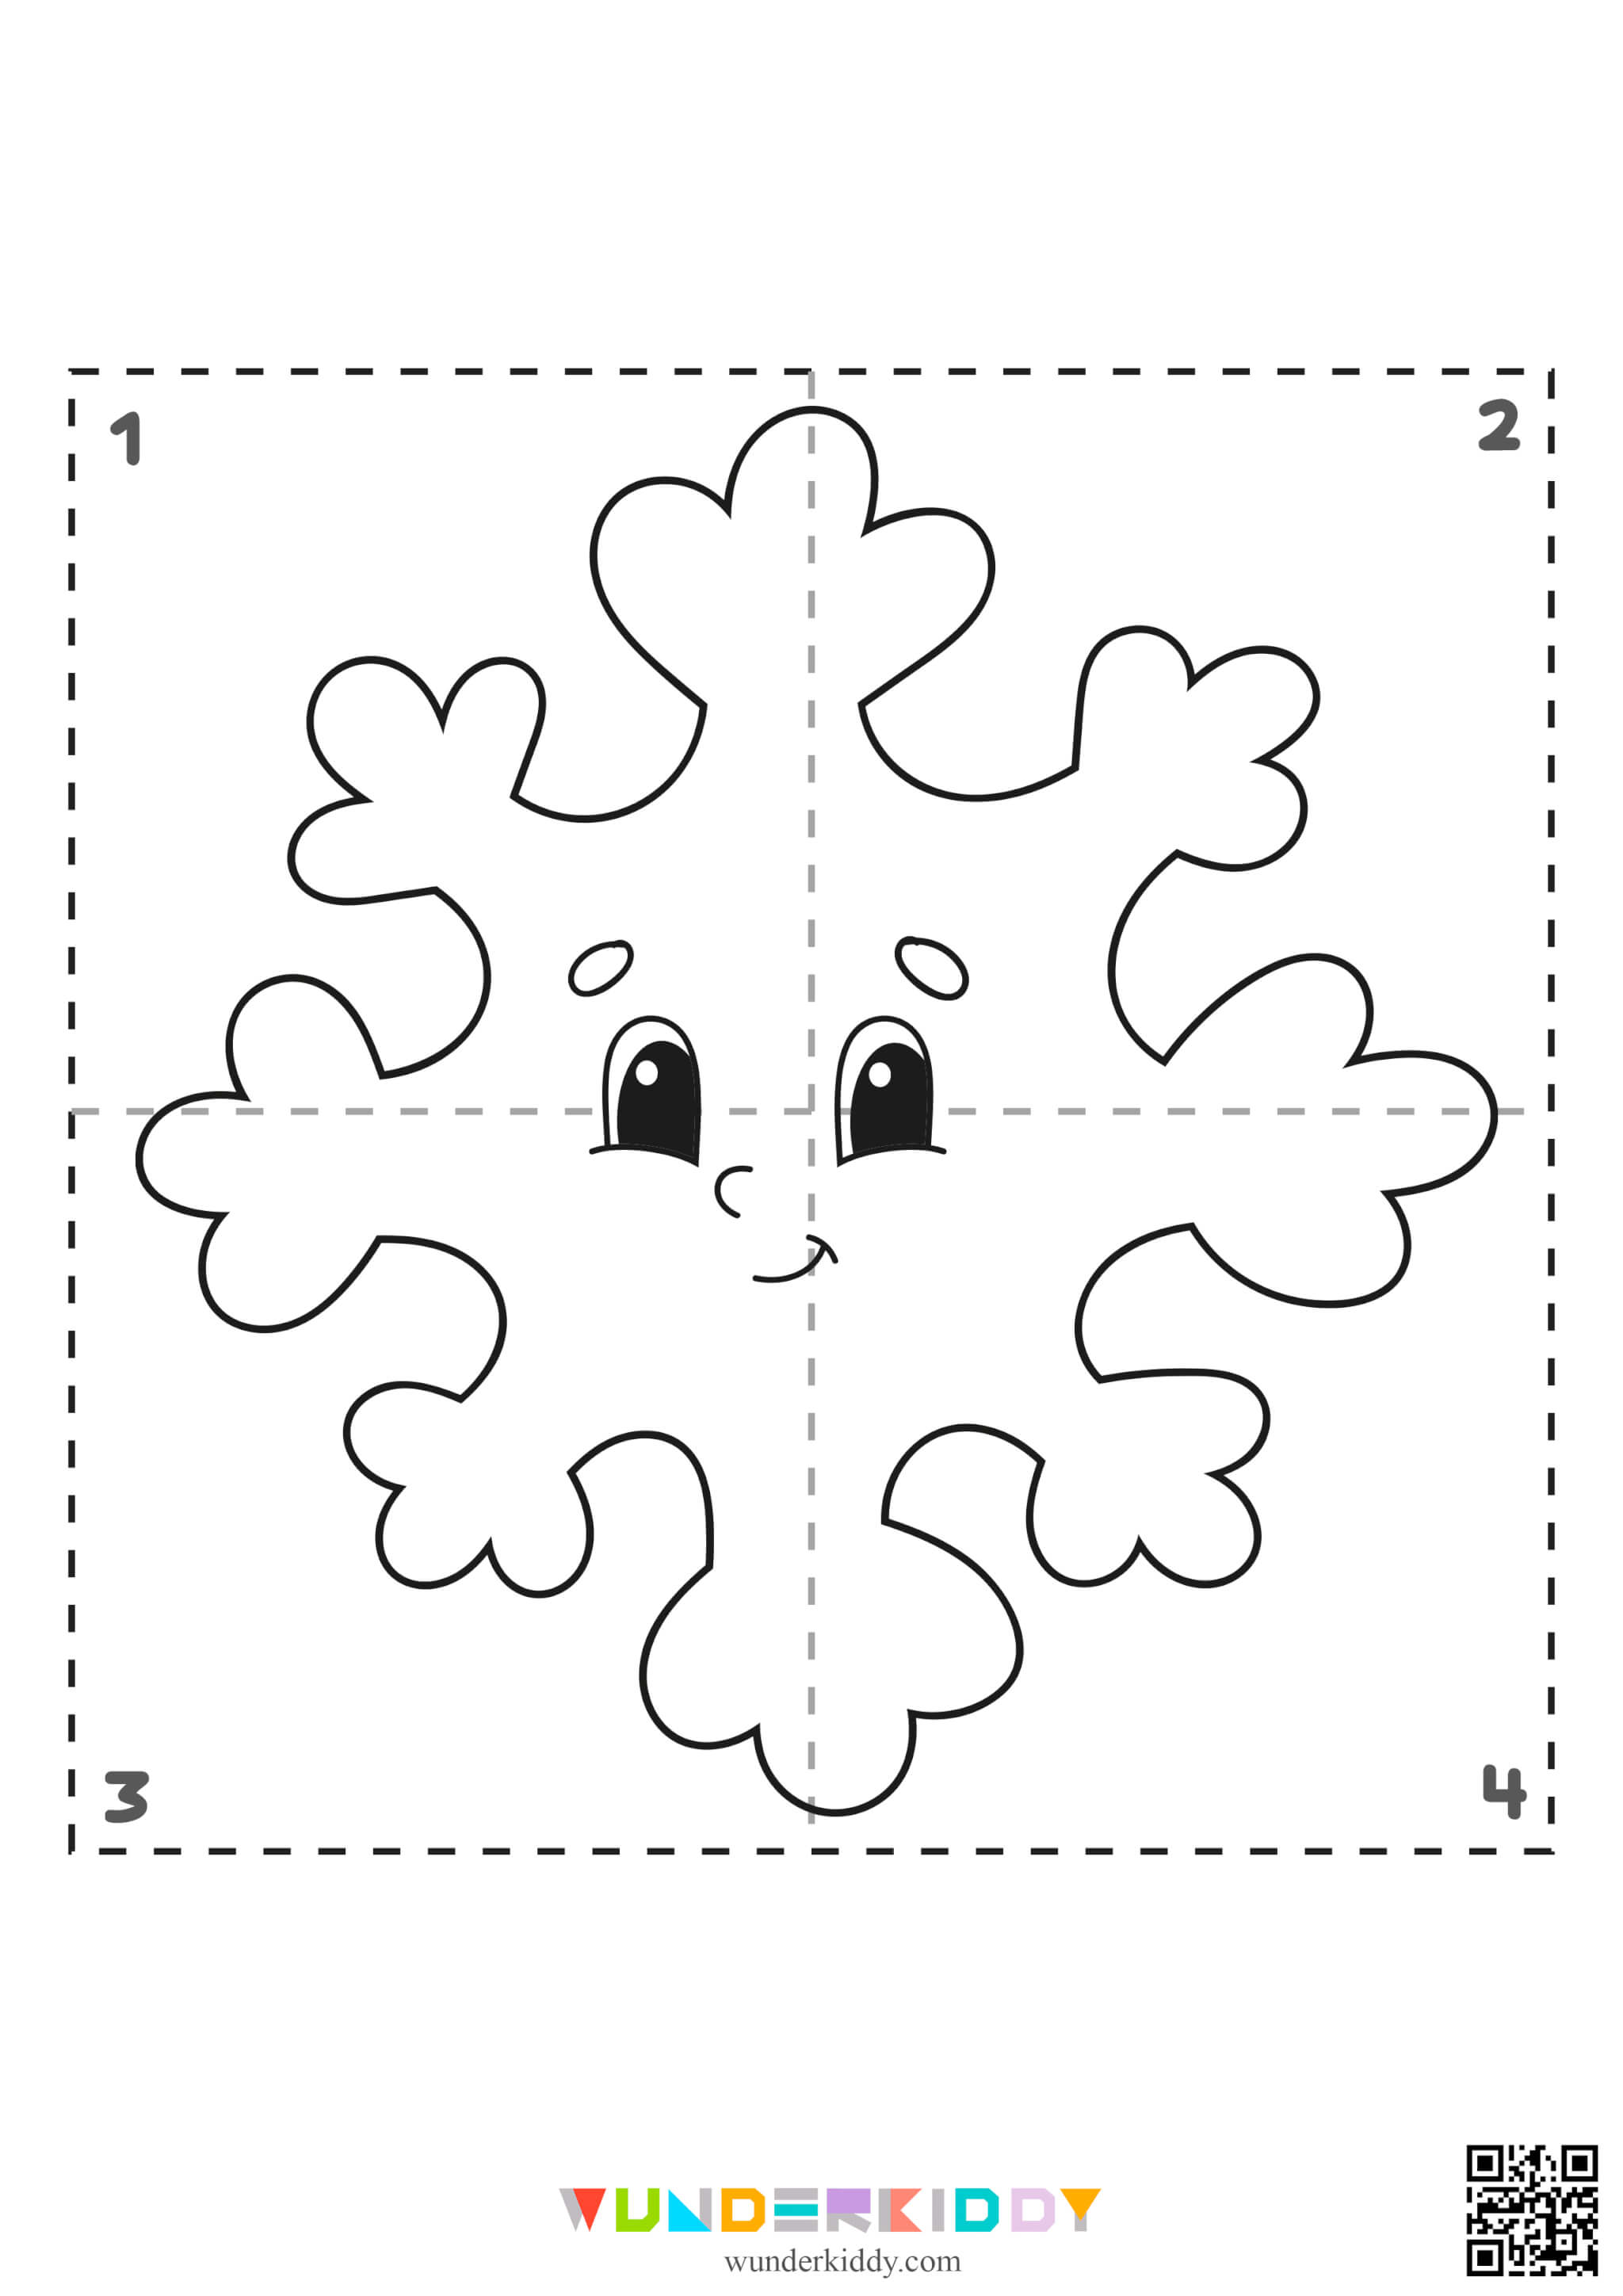 Coloring pages «New Year's Puzzle» - Image 6